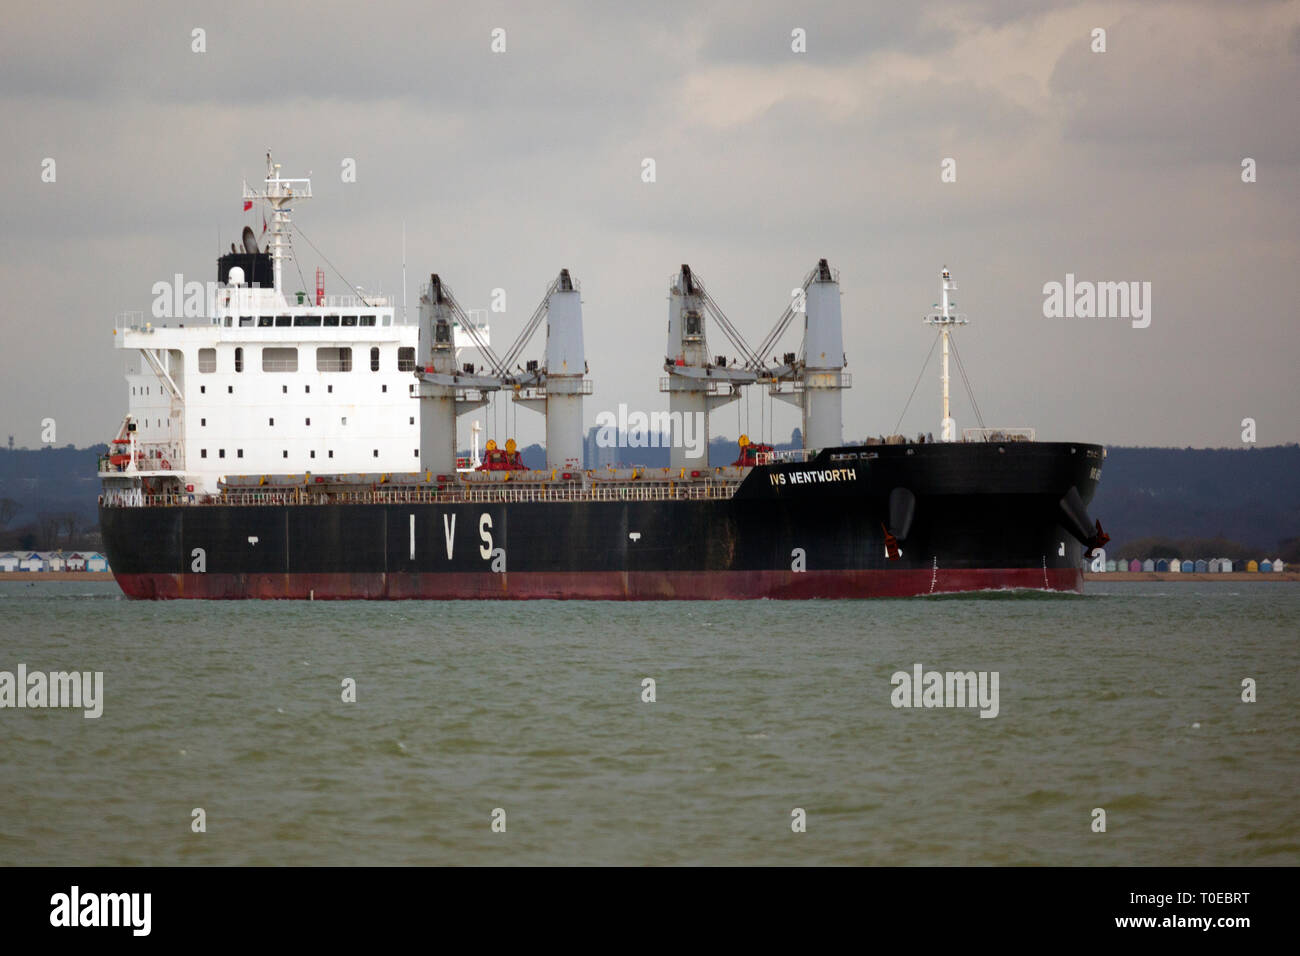 Ship,Shipping,Bulk,Carrier,IVS,Wentworth,Singapore,flag,home,port,leaving Southampton,Port,entering,The Solent,Cowes,Isle of Wight, England,UK, Stock Photo